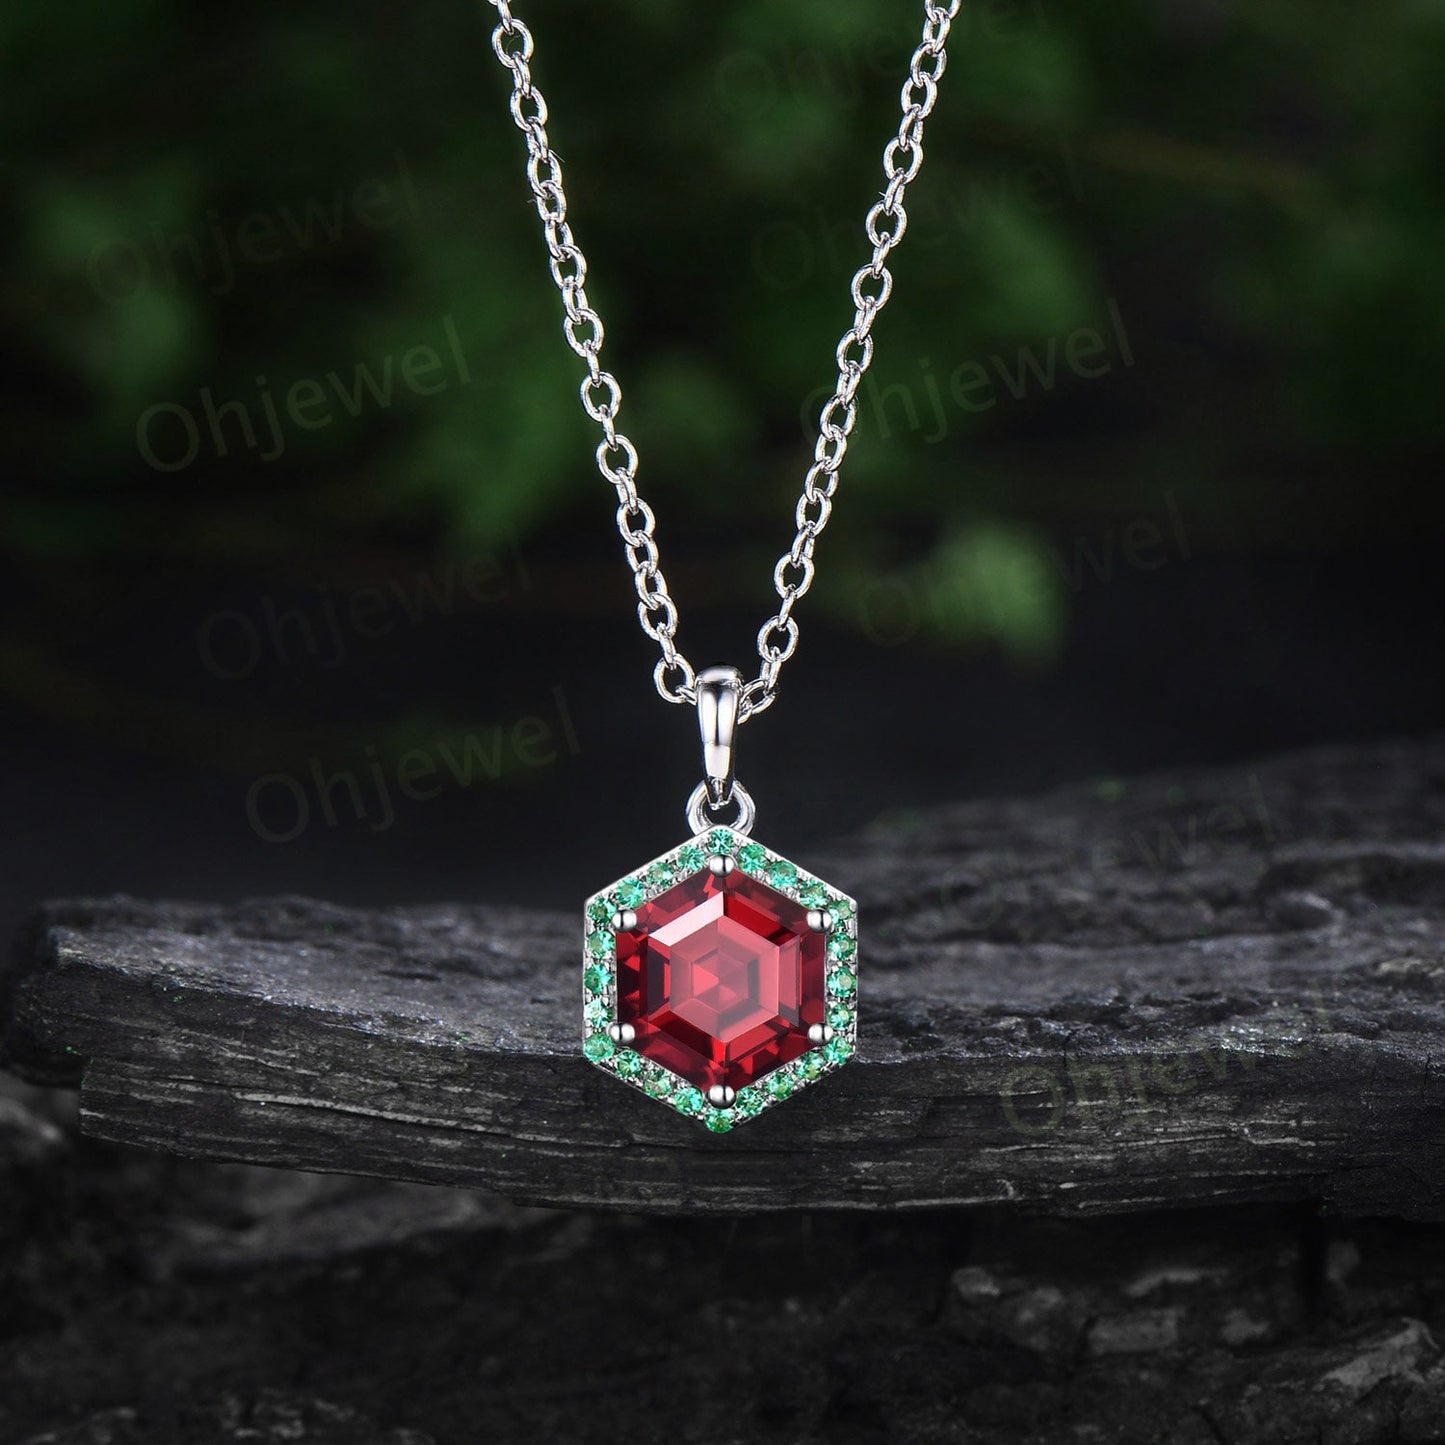 Vintage hexagon cut red ruby necklace rose gold unique 6 prong halo emerald necklace Pendant women dainty wedding anniversary gift her